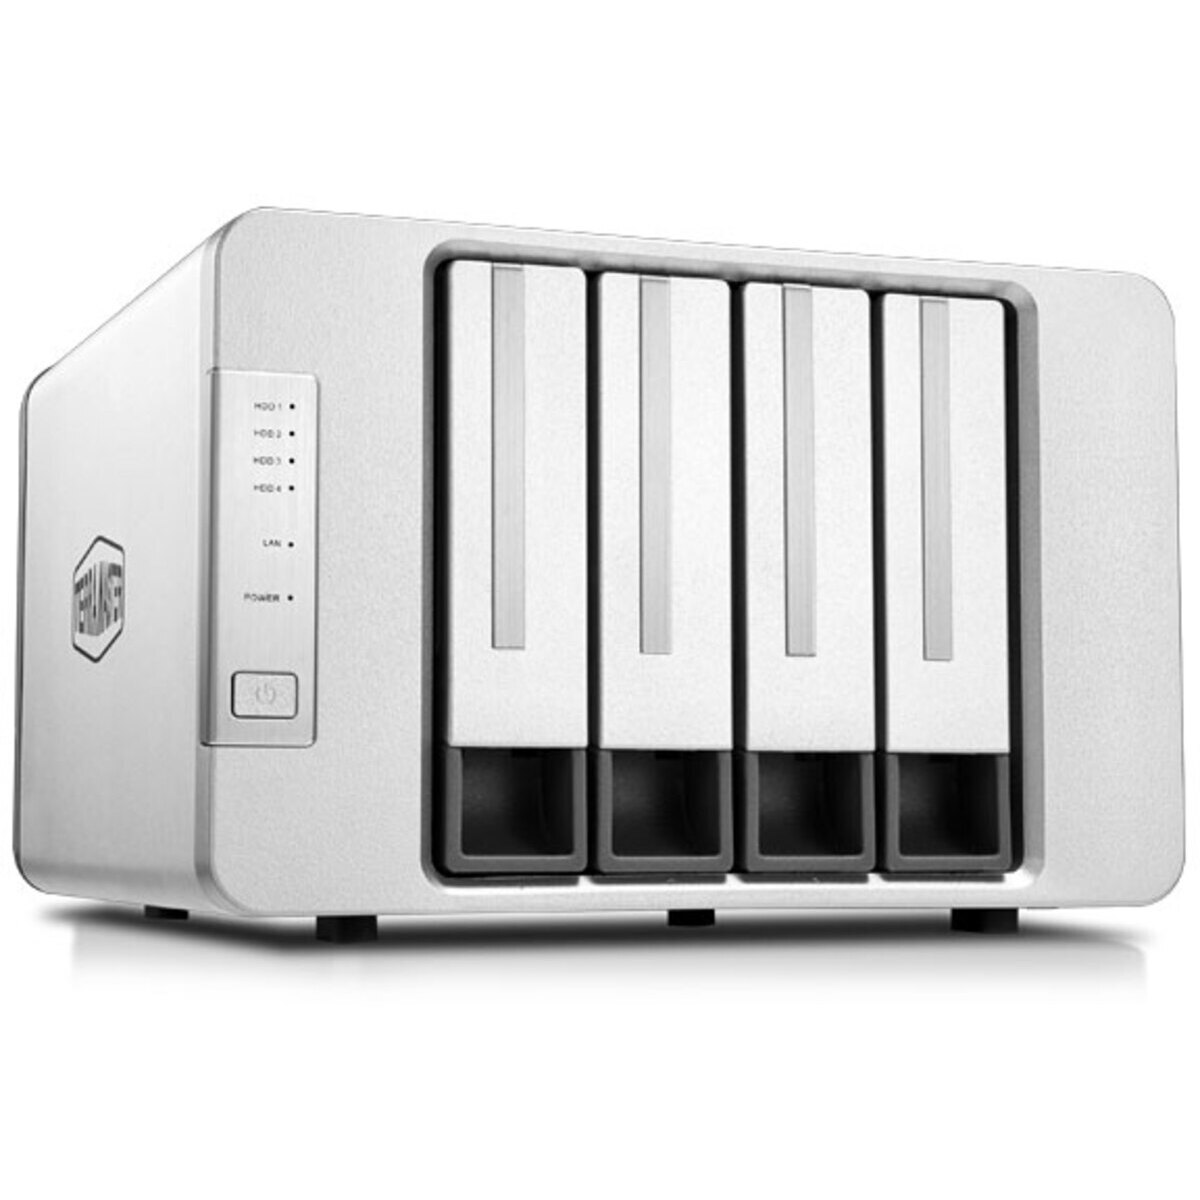 TerraMaster F4-223 40tb 4-Bay Desktop Personal / Basic Home / Small Office NAS - Network Attached Storage Device 2x20tb Western Digital Ultrastar HC560 WUH722020ALE6L4 3.5 7200rpm SATA 6Gb/s HDD ENTERPRISE Class Drives Installed - Burn-In Tested - FREE RAM UPGRADE F4-223